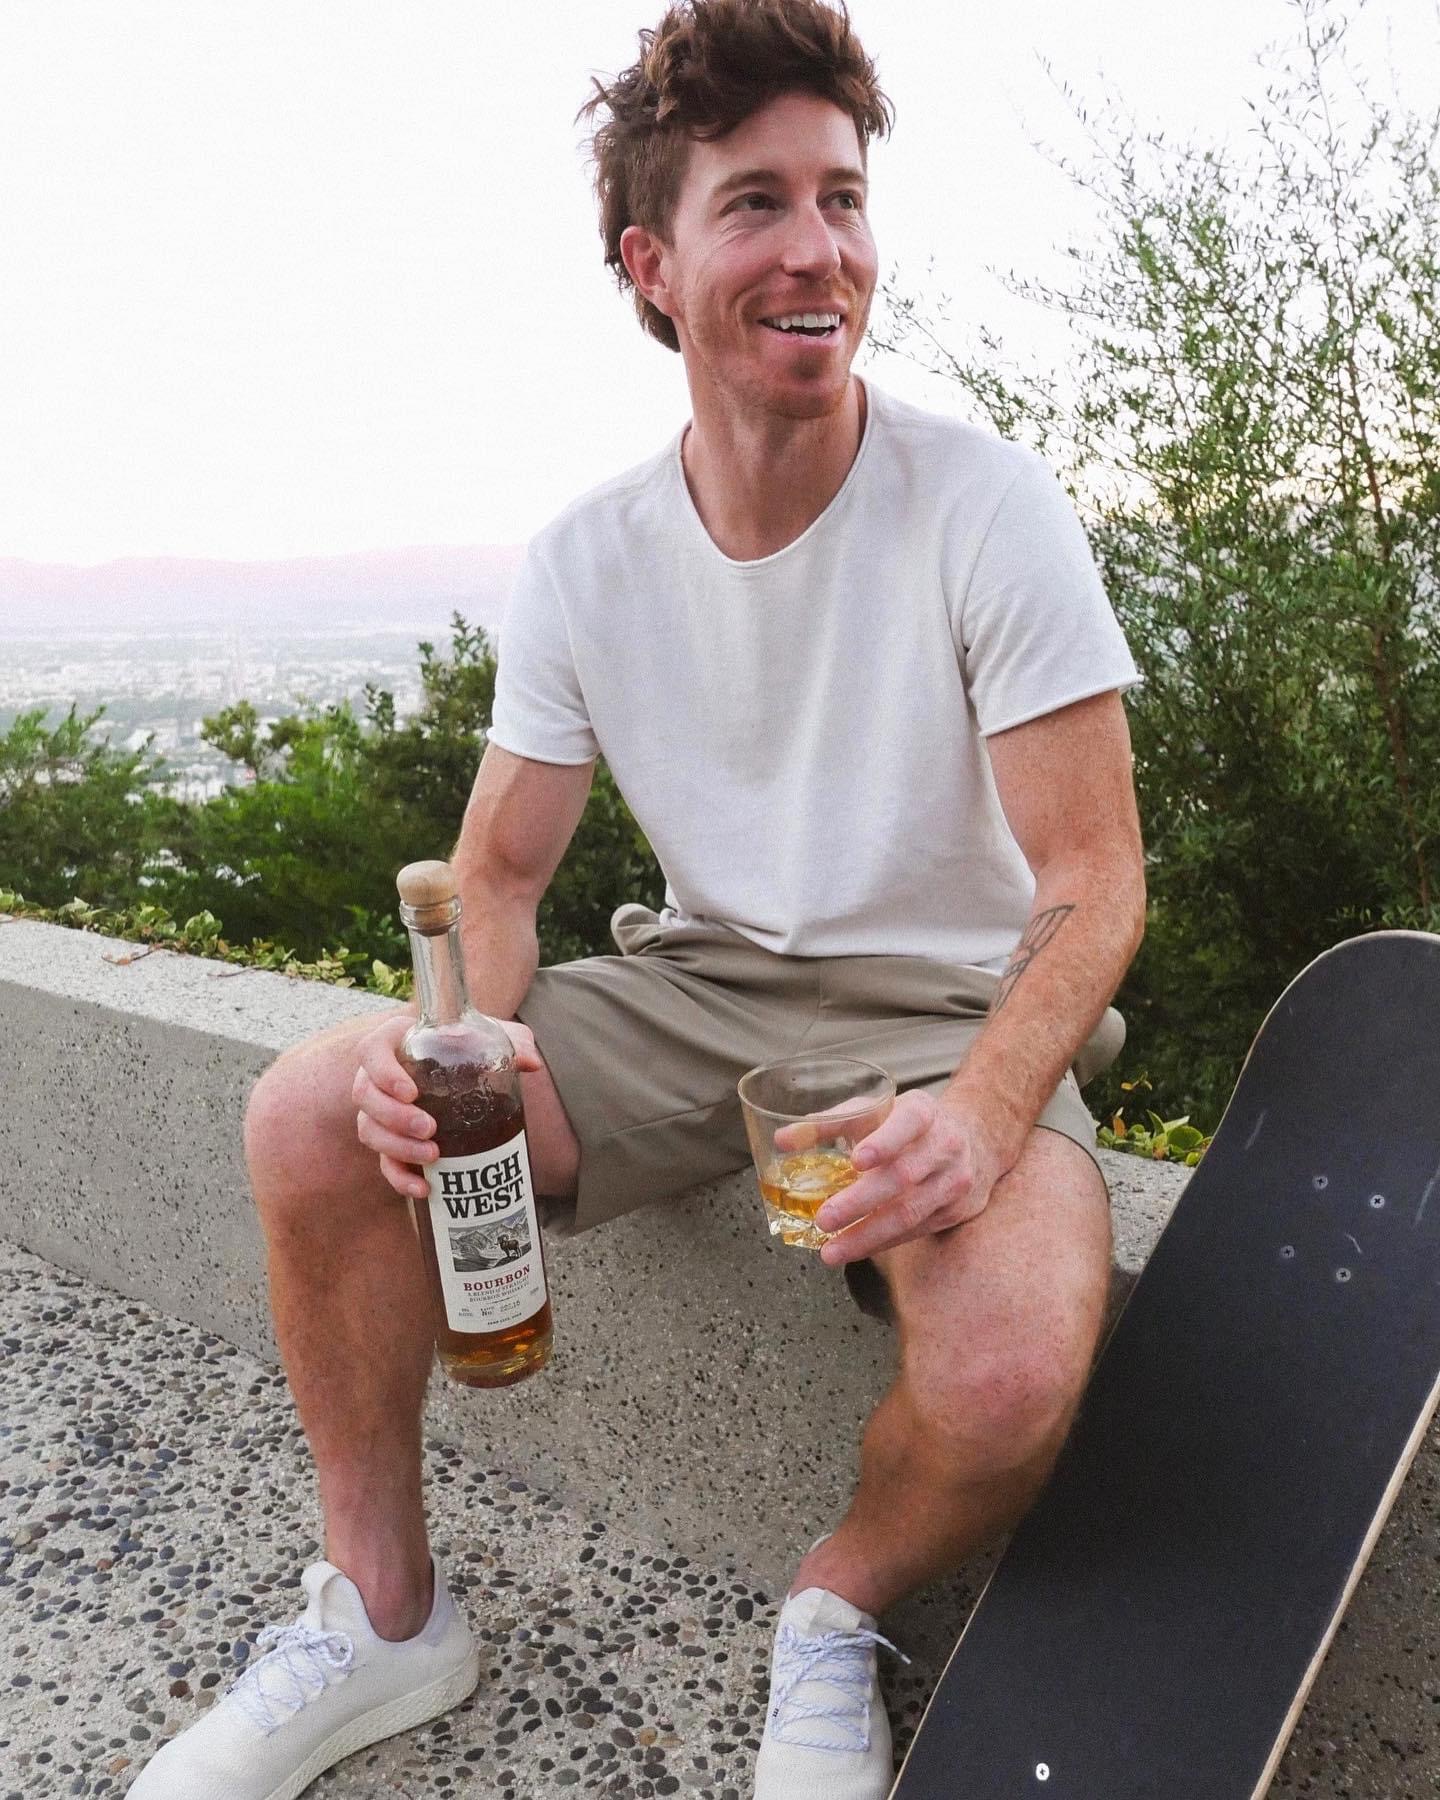 High West Partners With Shaun White To Help Protect The West